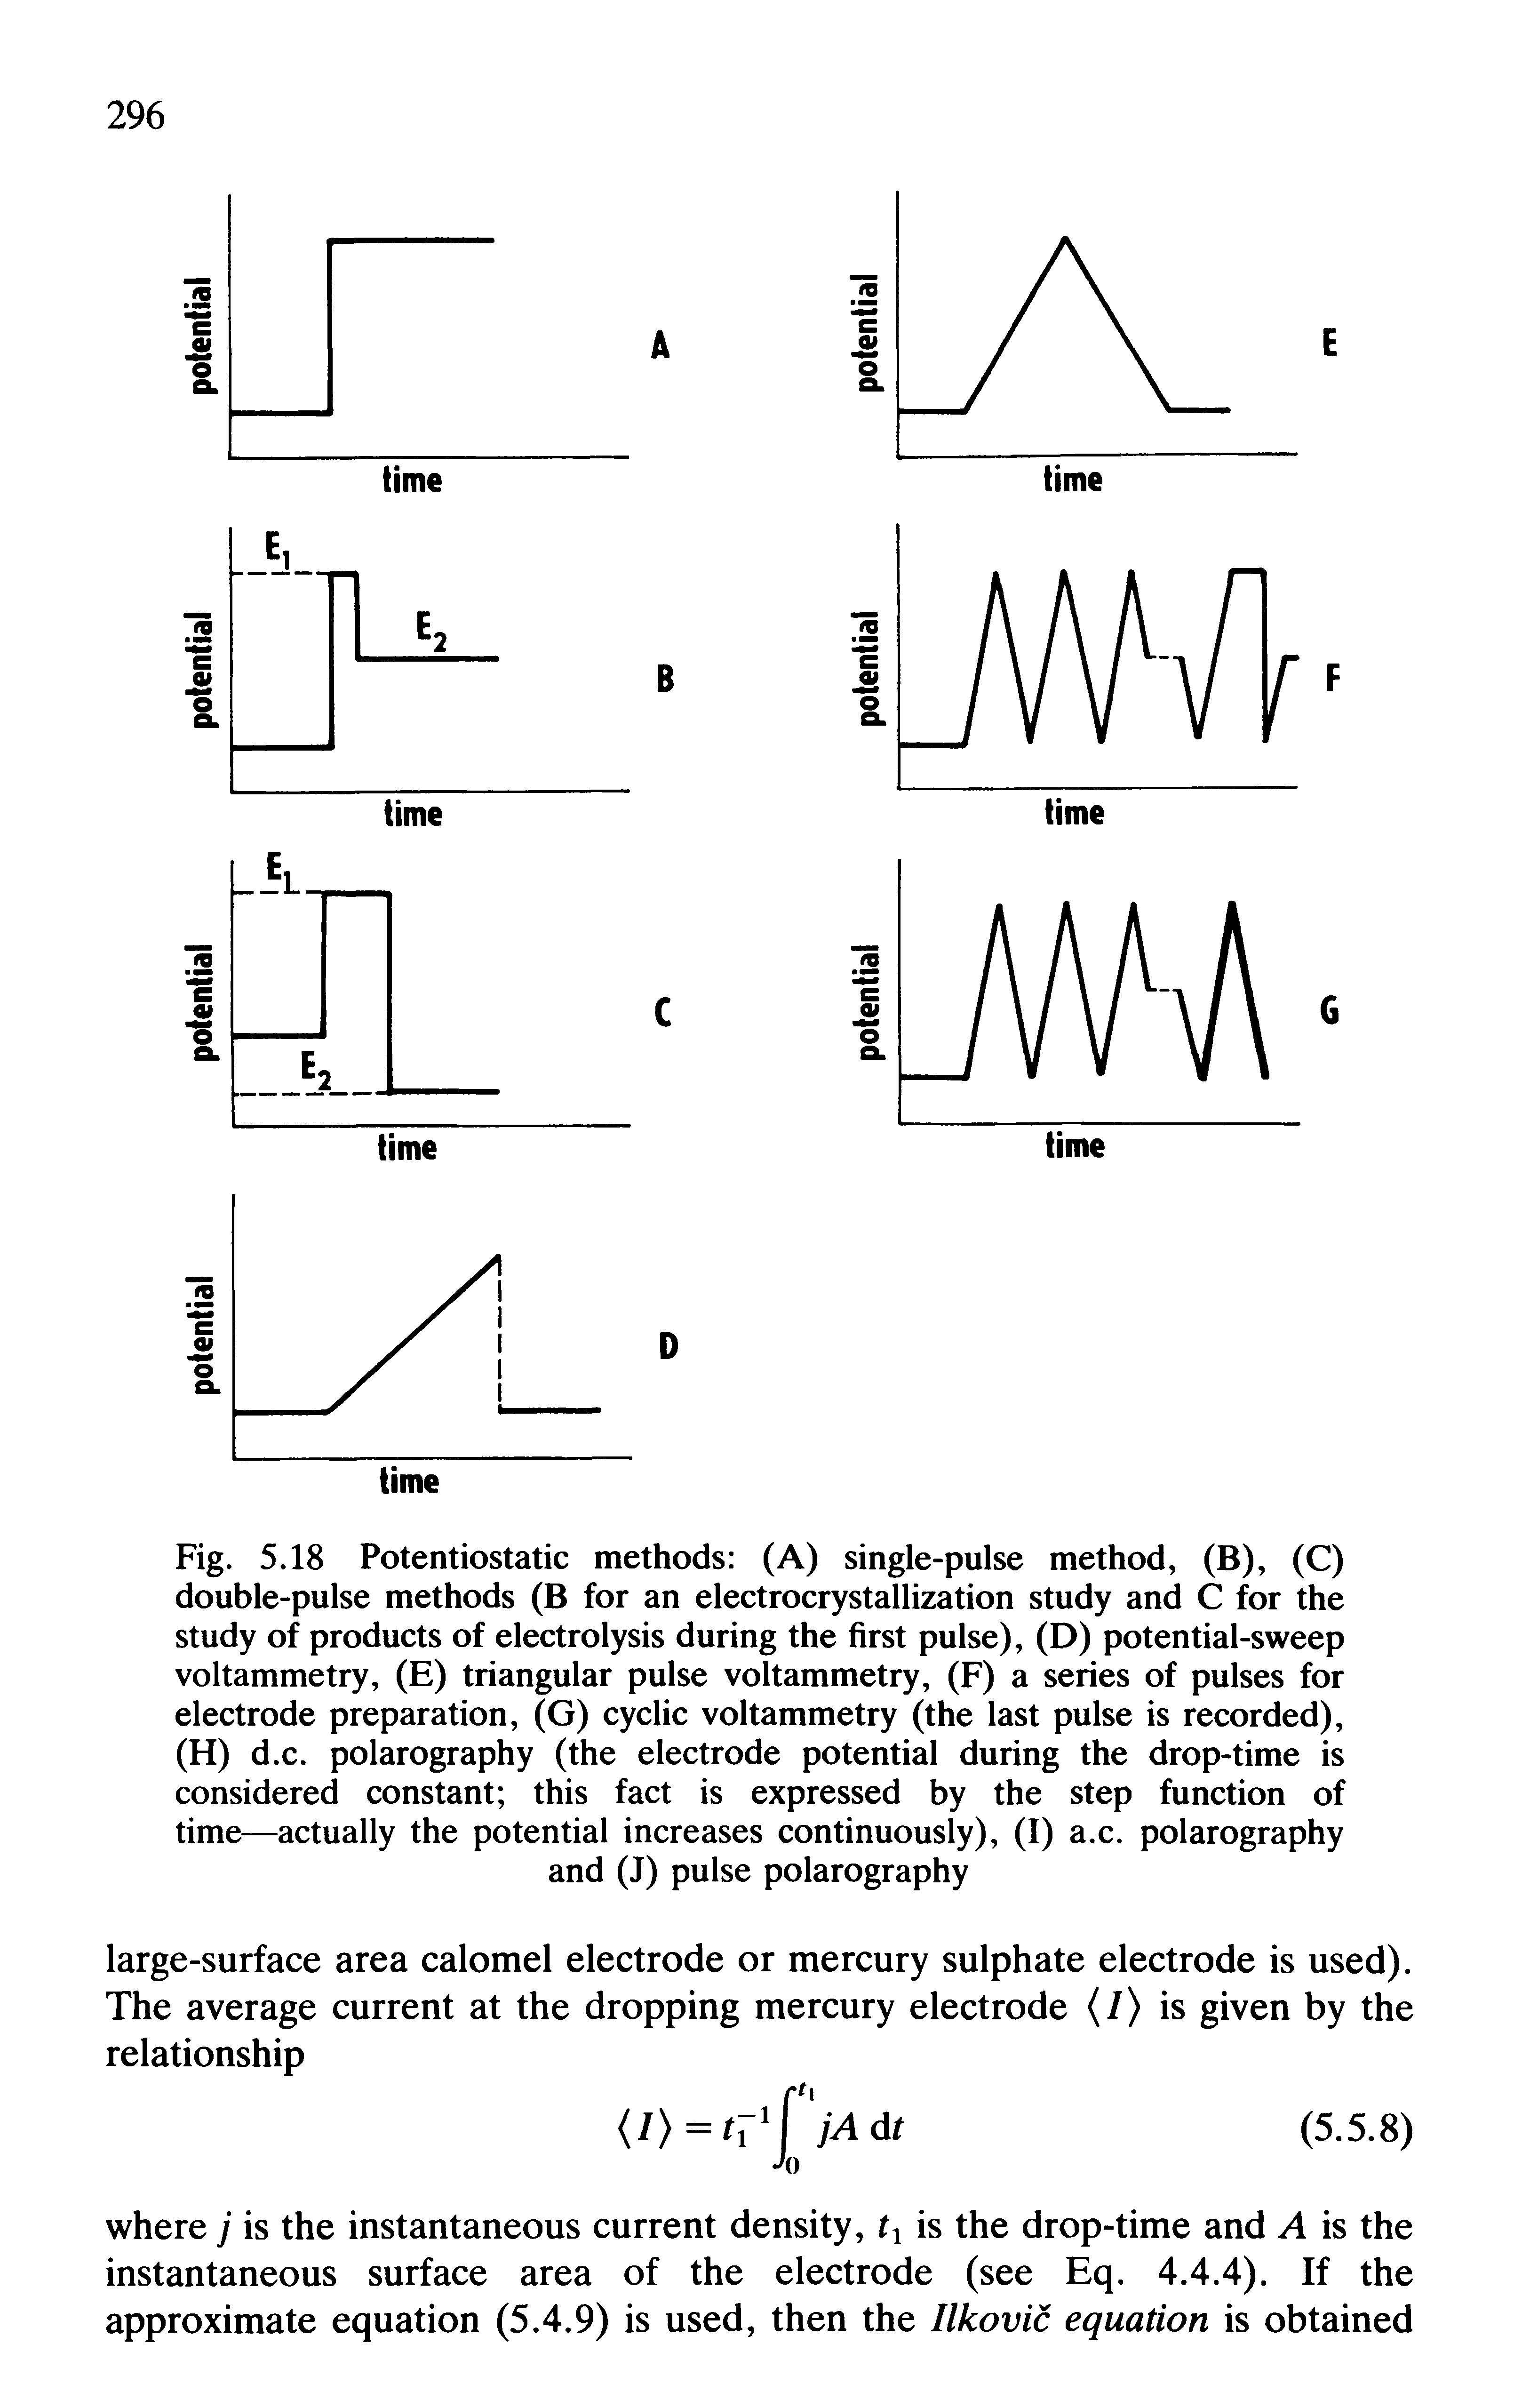 Fig. 5.18 Potentiostatic methods (A) single-pulse method, (B), (C) double-pulse methods (B for an electrocrystallization study and C for the study of products of electrolysis during the first pulse), (D) potential-sweep voltammetry, (E) triangular pulse voltammetry, (F) a series of pulses for electrode preparation, (G) cyclic voltammetry (the last pulse is recorded), (H) d.c. polarography (the electrode potential during the drop-time is considered constant this fact is expressed by the step function of time—actually the potential increases continuously), (I) a.c. polarography and (J) pulse polarography...